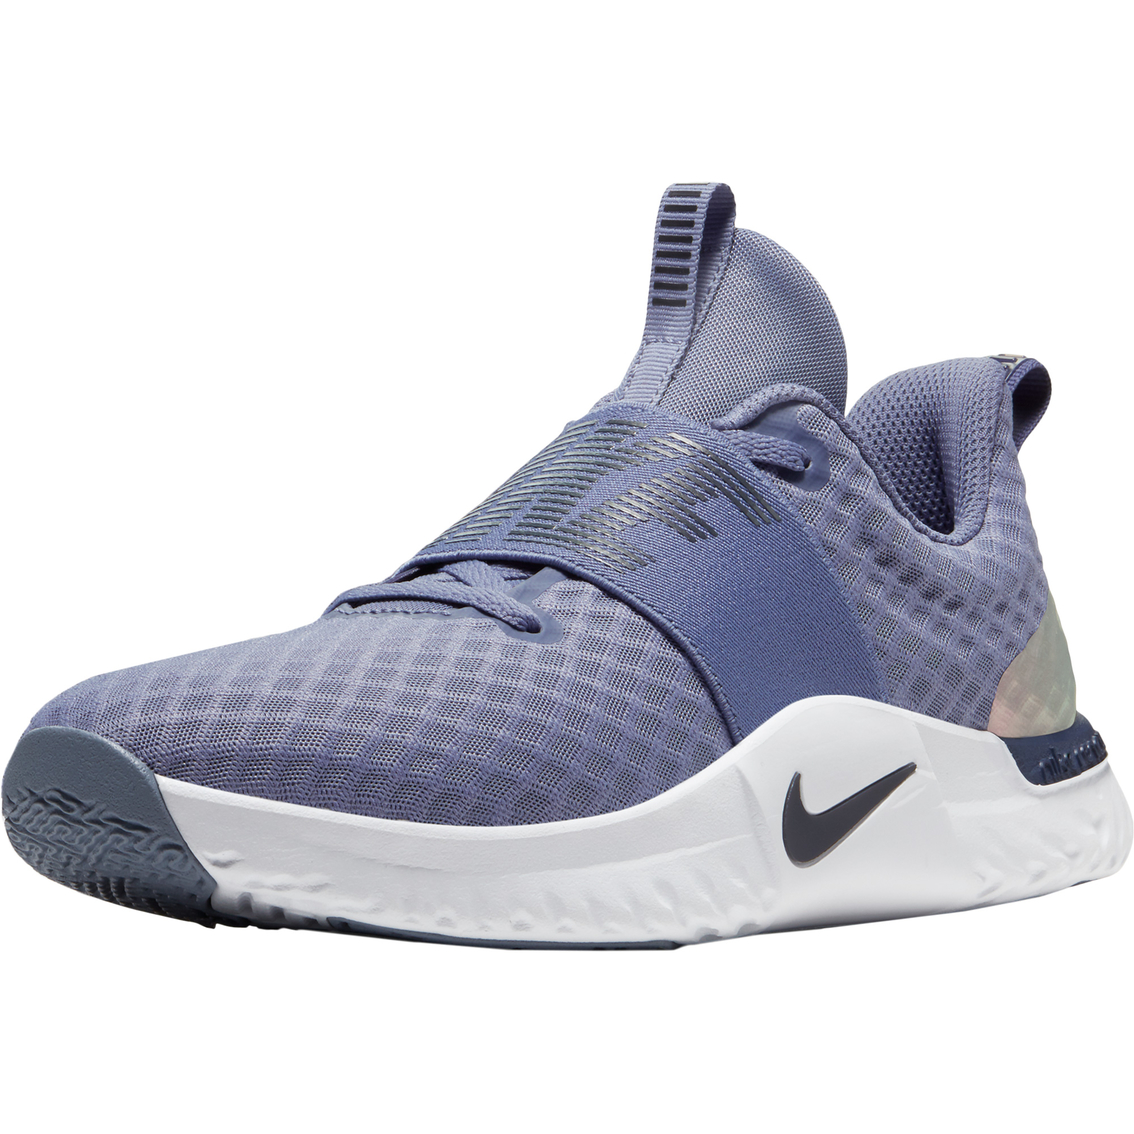 nike in season tr 9 women's training shoes stores